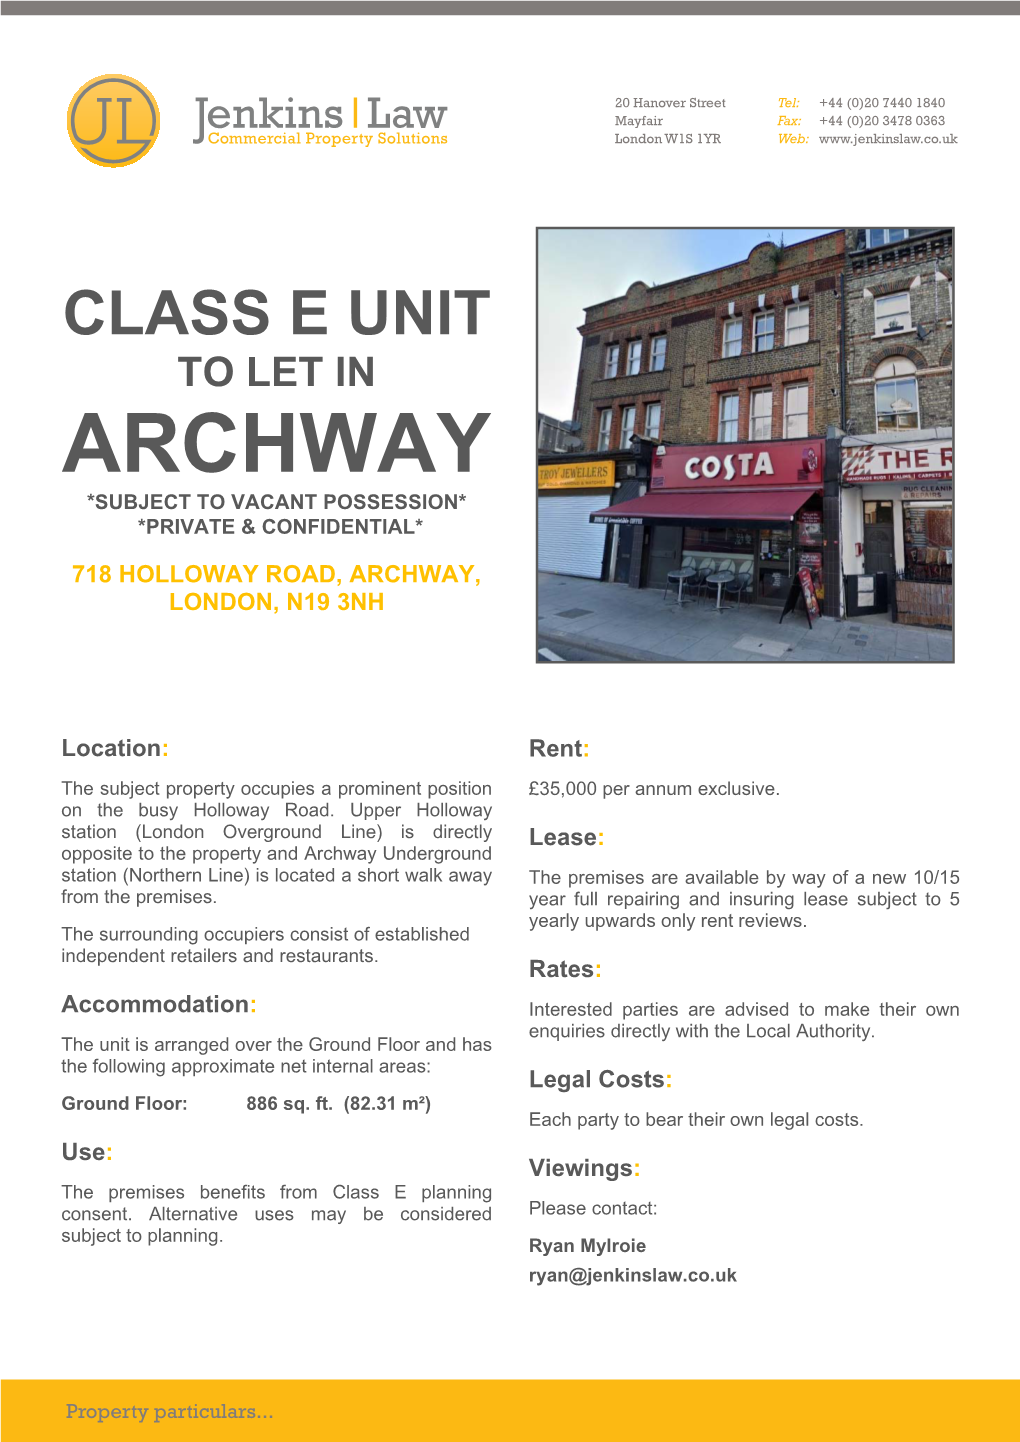 Archway *Subject to Vacant Possession* *Private & Confidential*